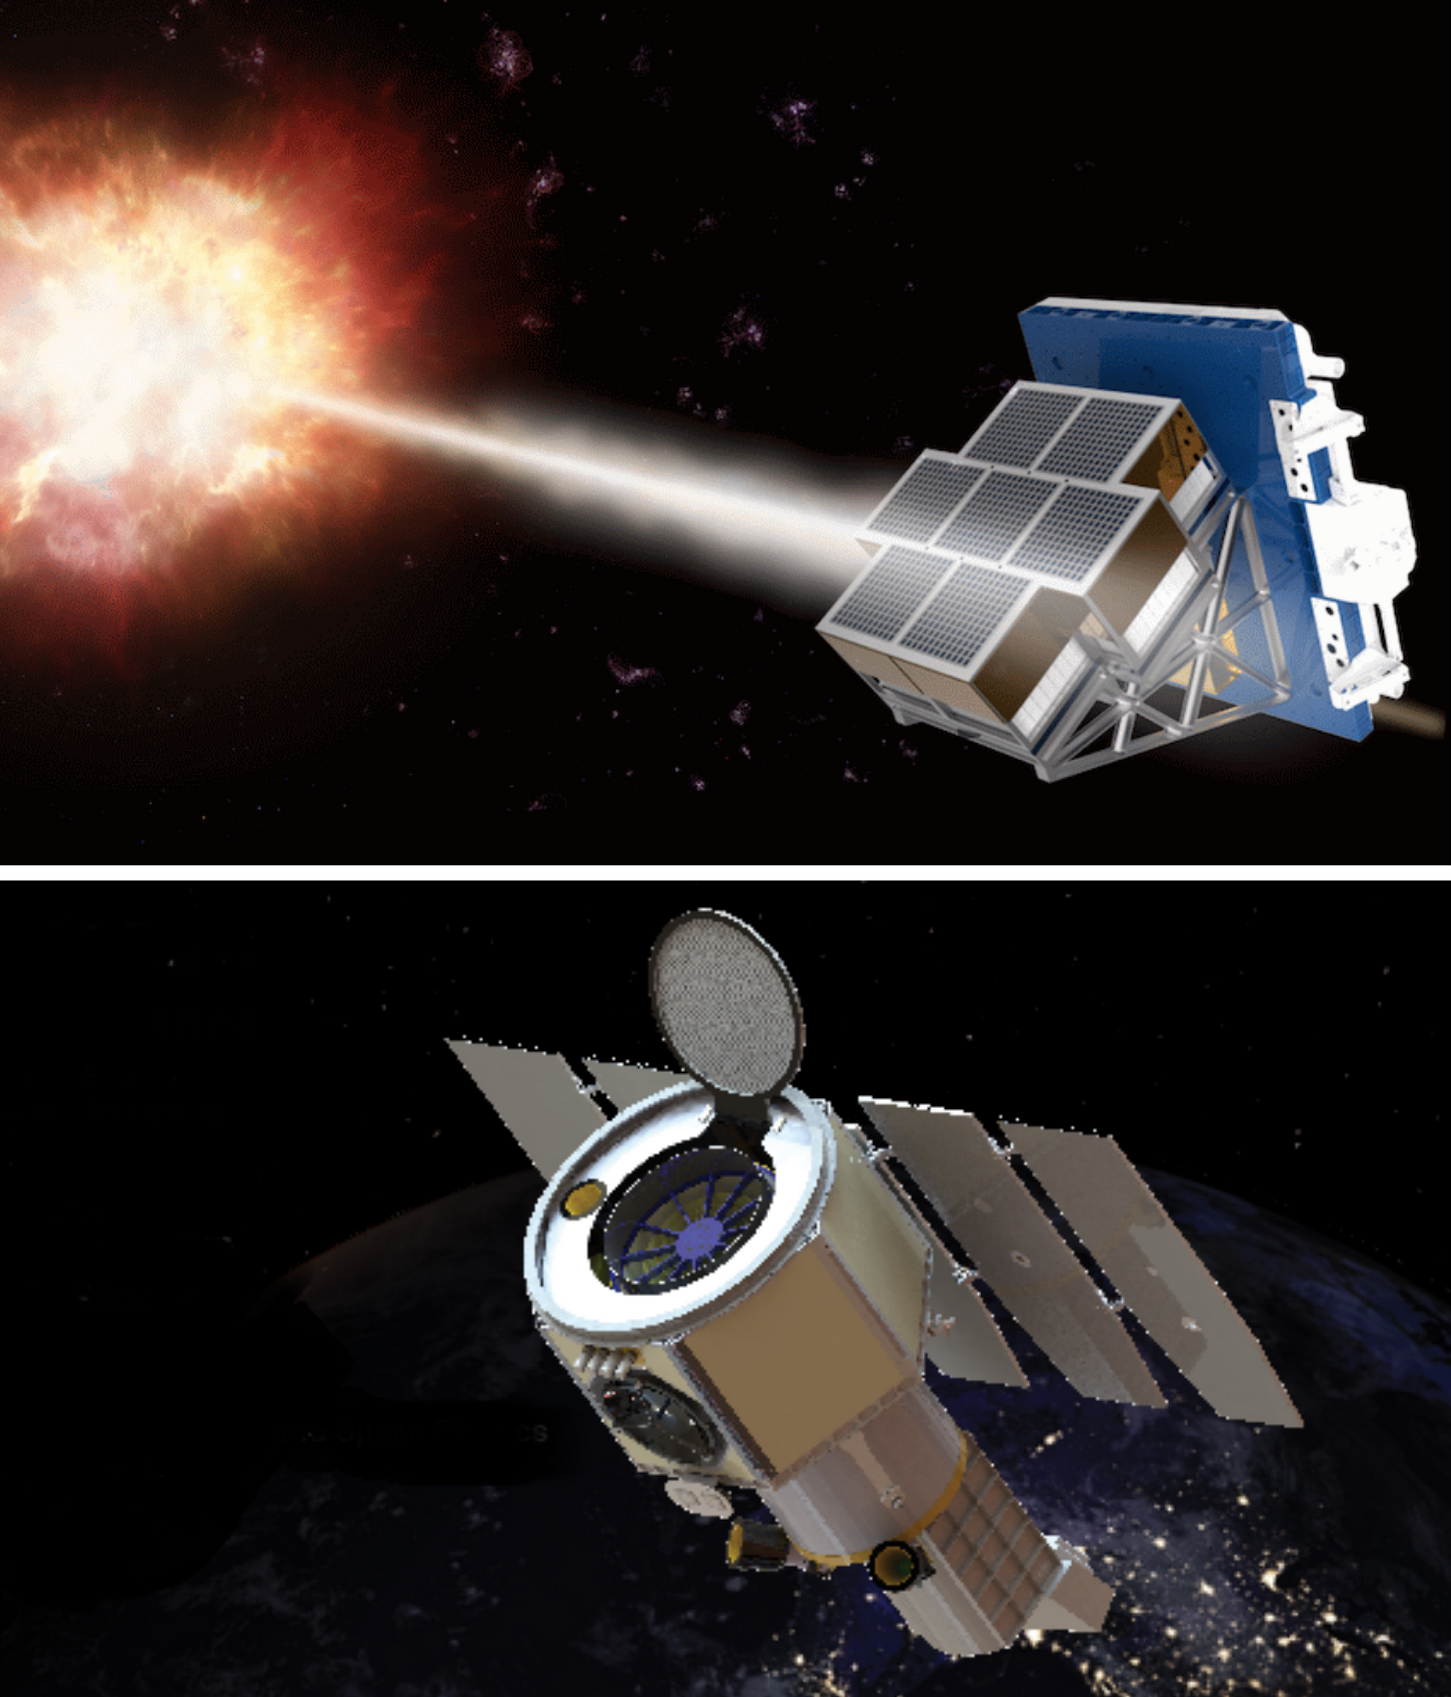 Top: An illustration of the LEAP, spacecraft. Bottom: An illustration of the ESCAPE, spacecraft.